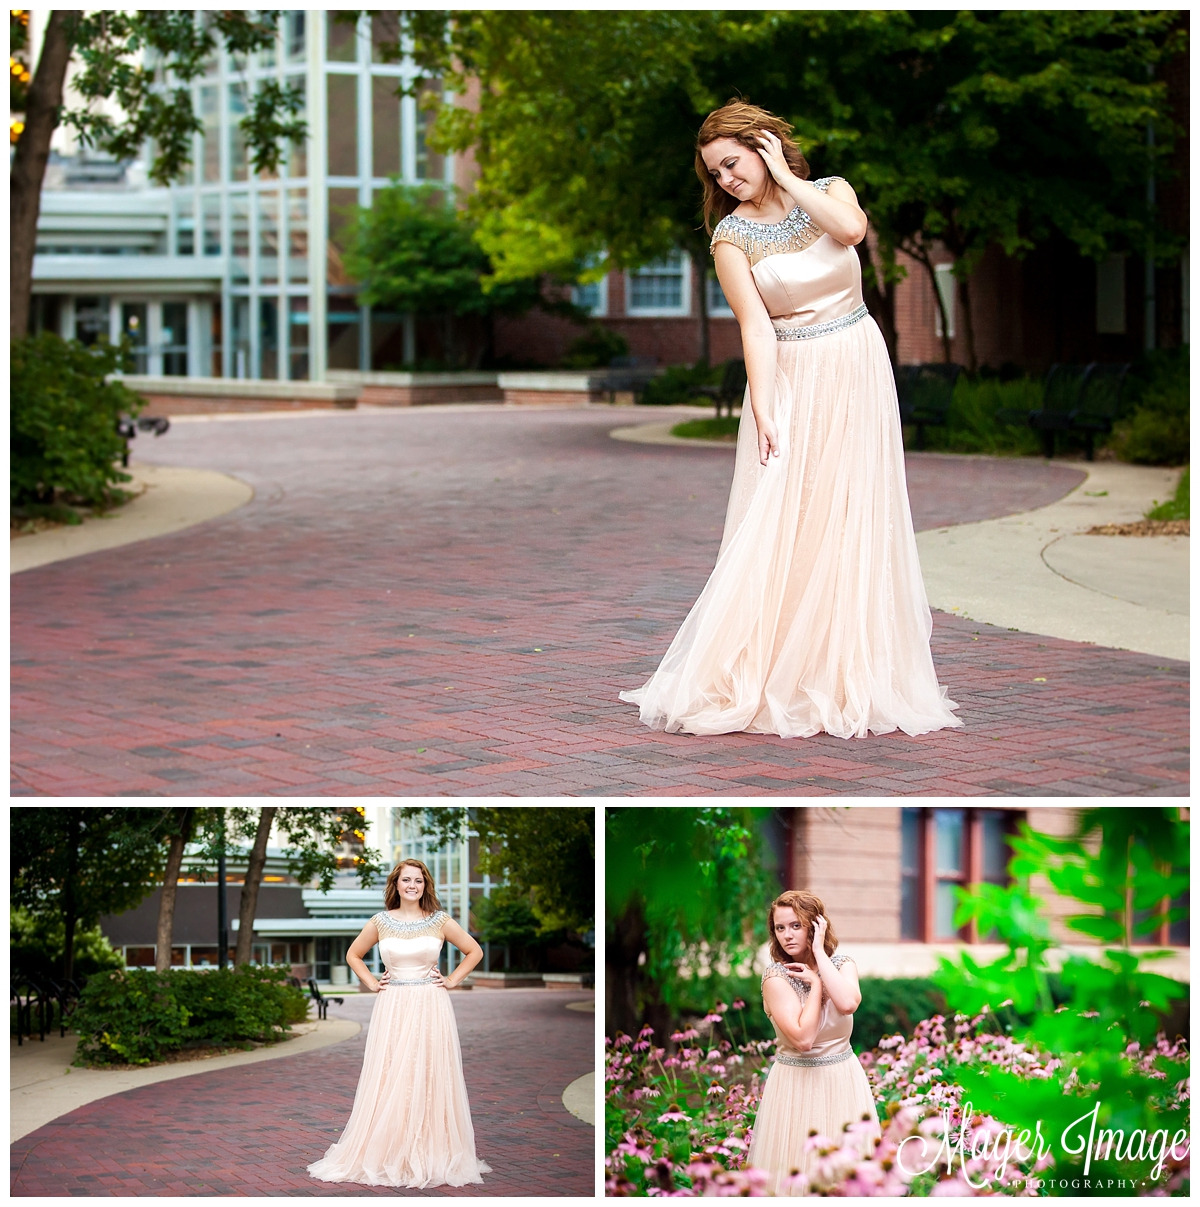 ballgown prom dress with flowers and brick walkway Savannah